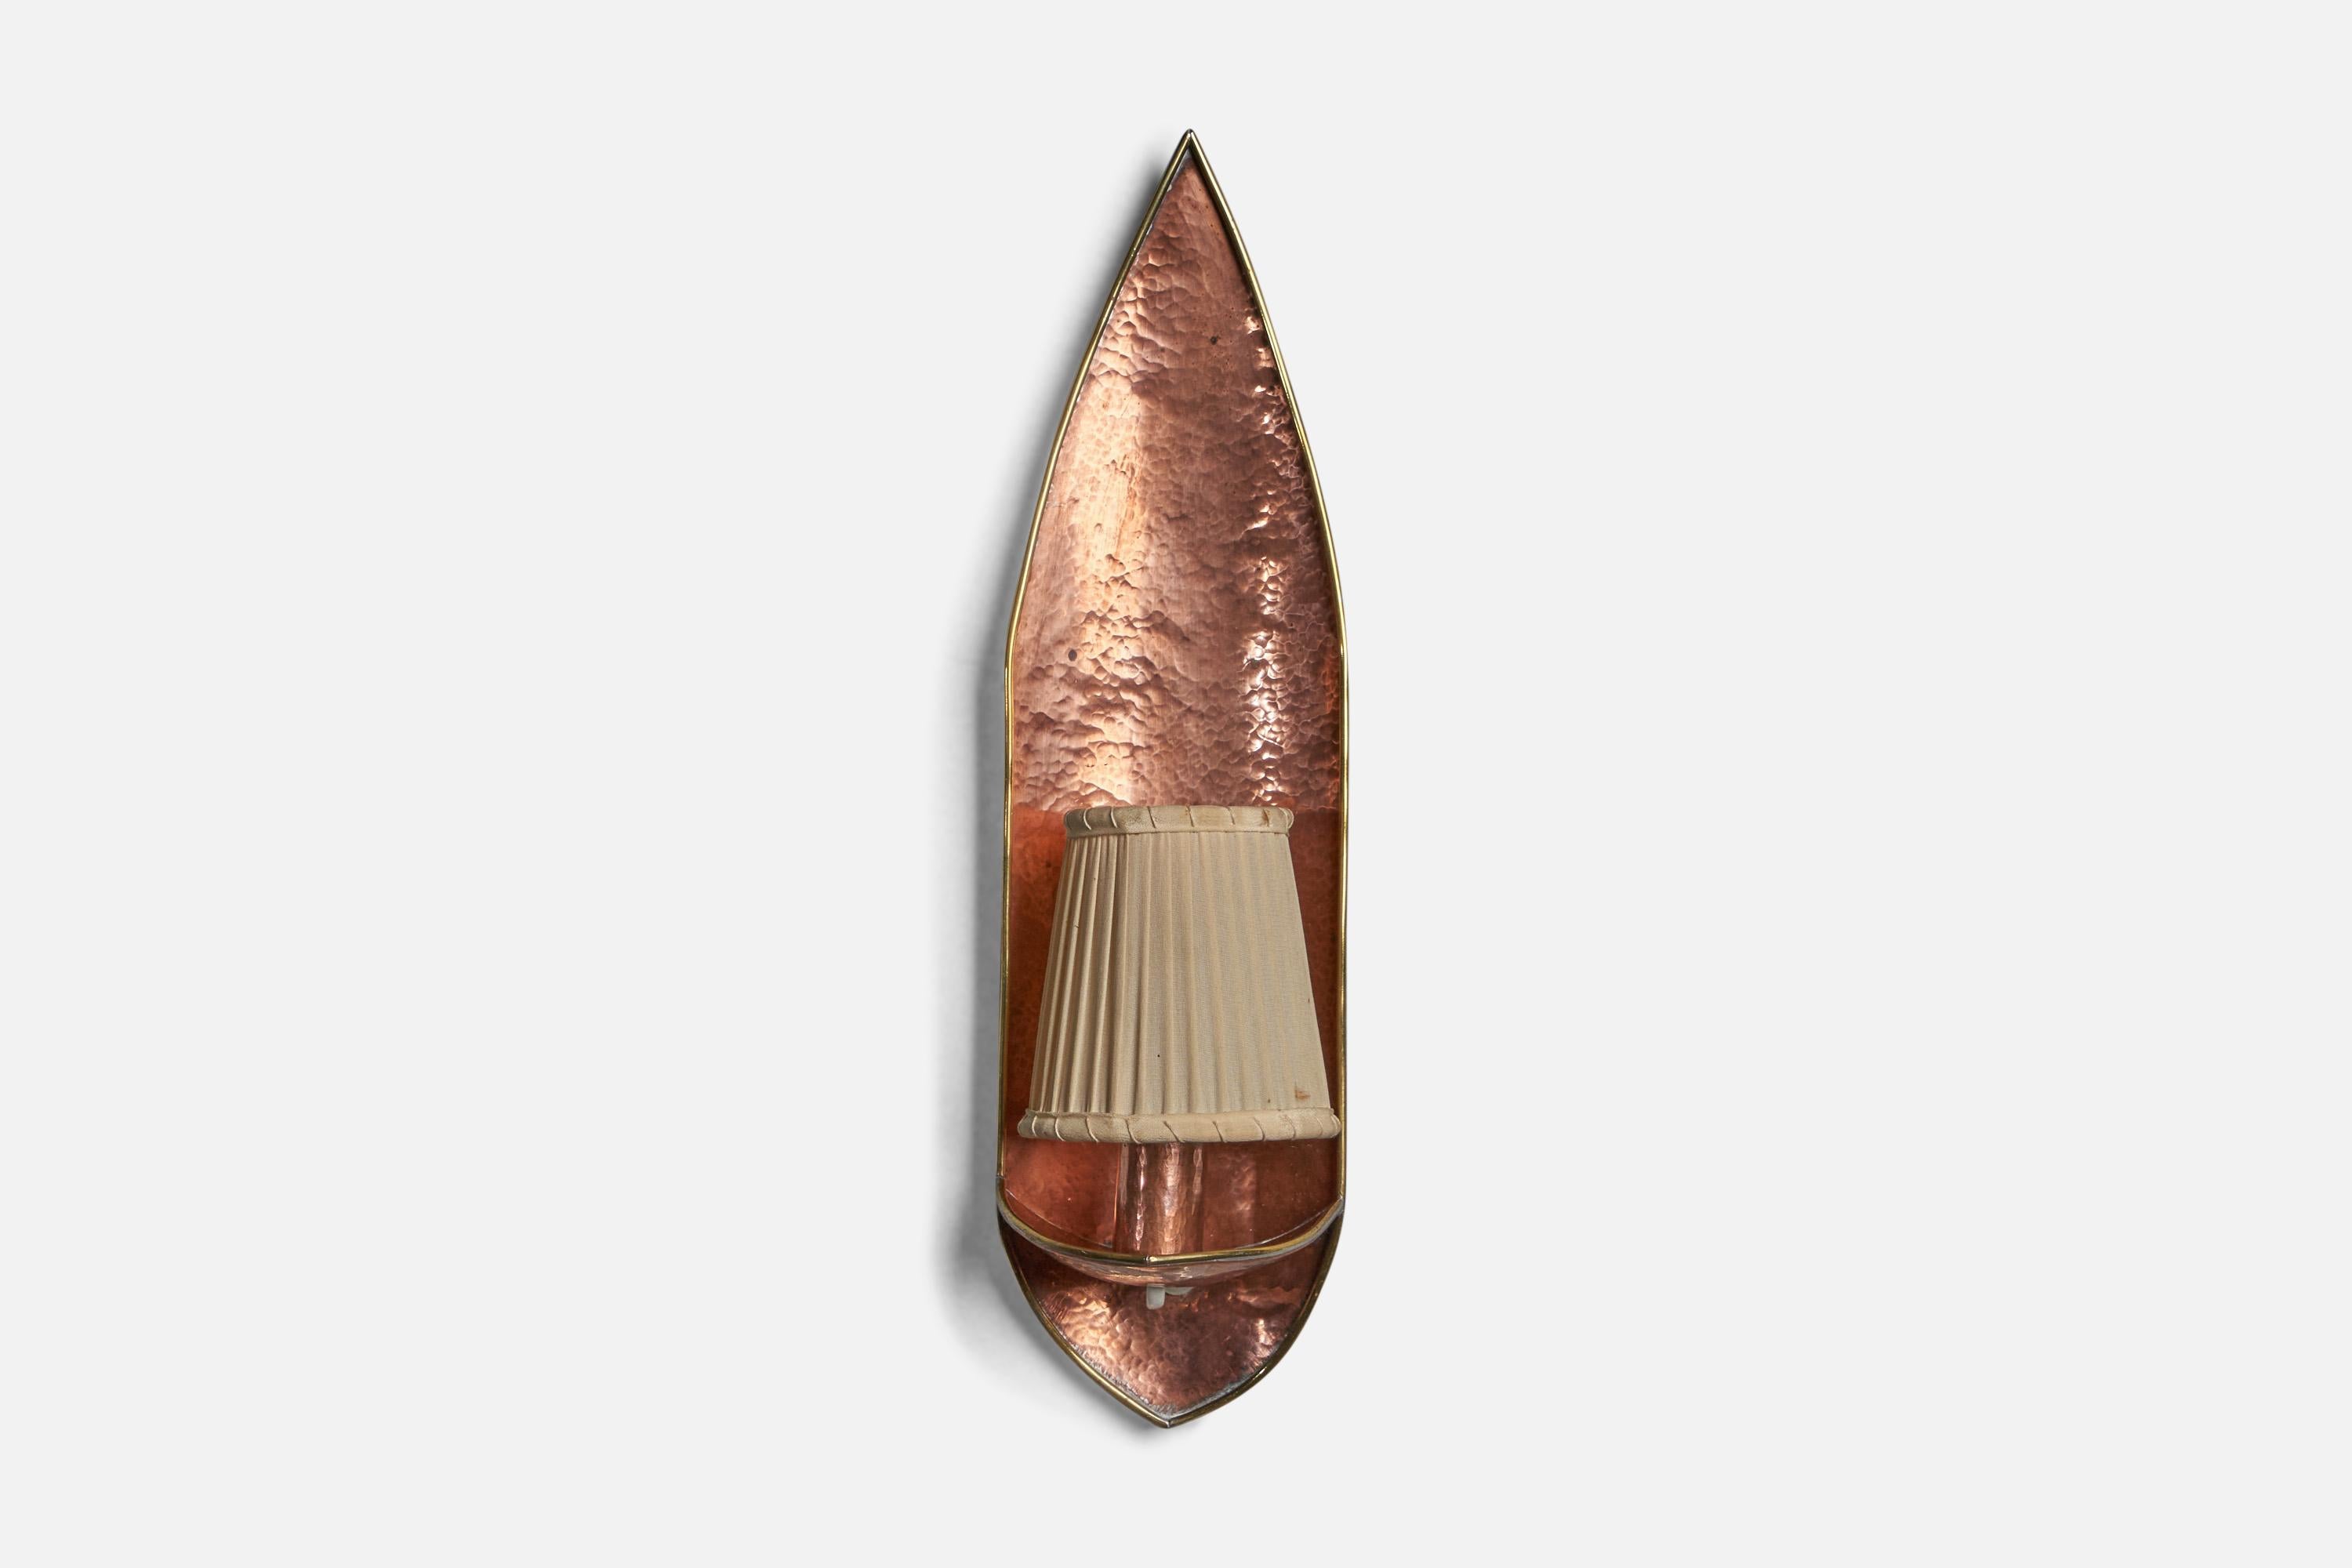 A hammered copper and beige fabric wall light designed and produced in Sweden, c. 1950s.

Overall Dimensions (inches): 15” H x 4” W x 4.25” D
Bulb Specifications: E-14 Bulb
Number of Sockets: 1